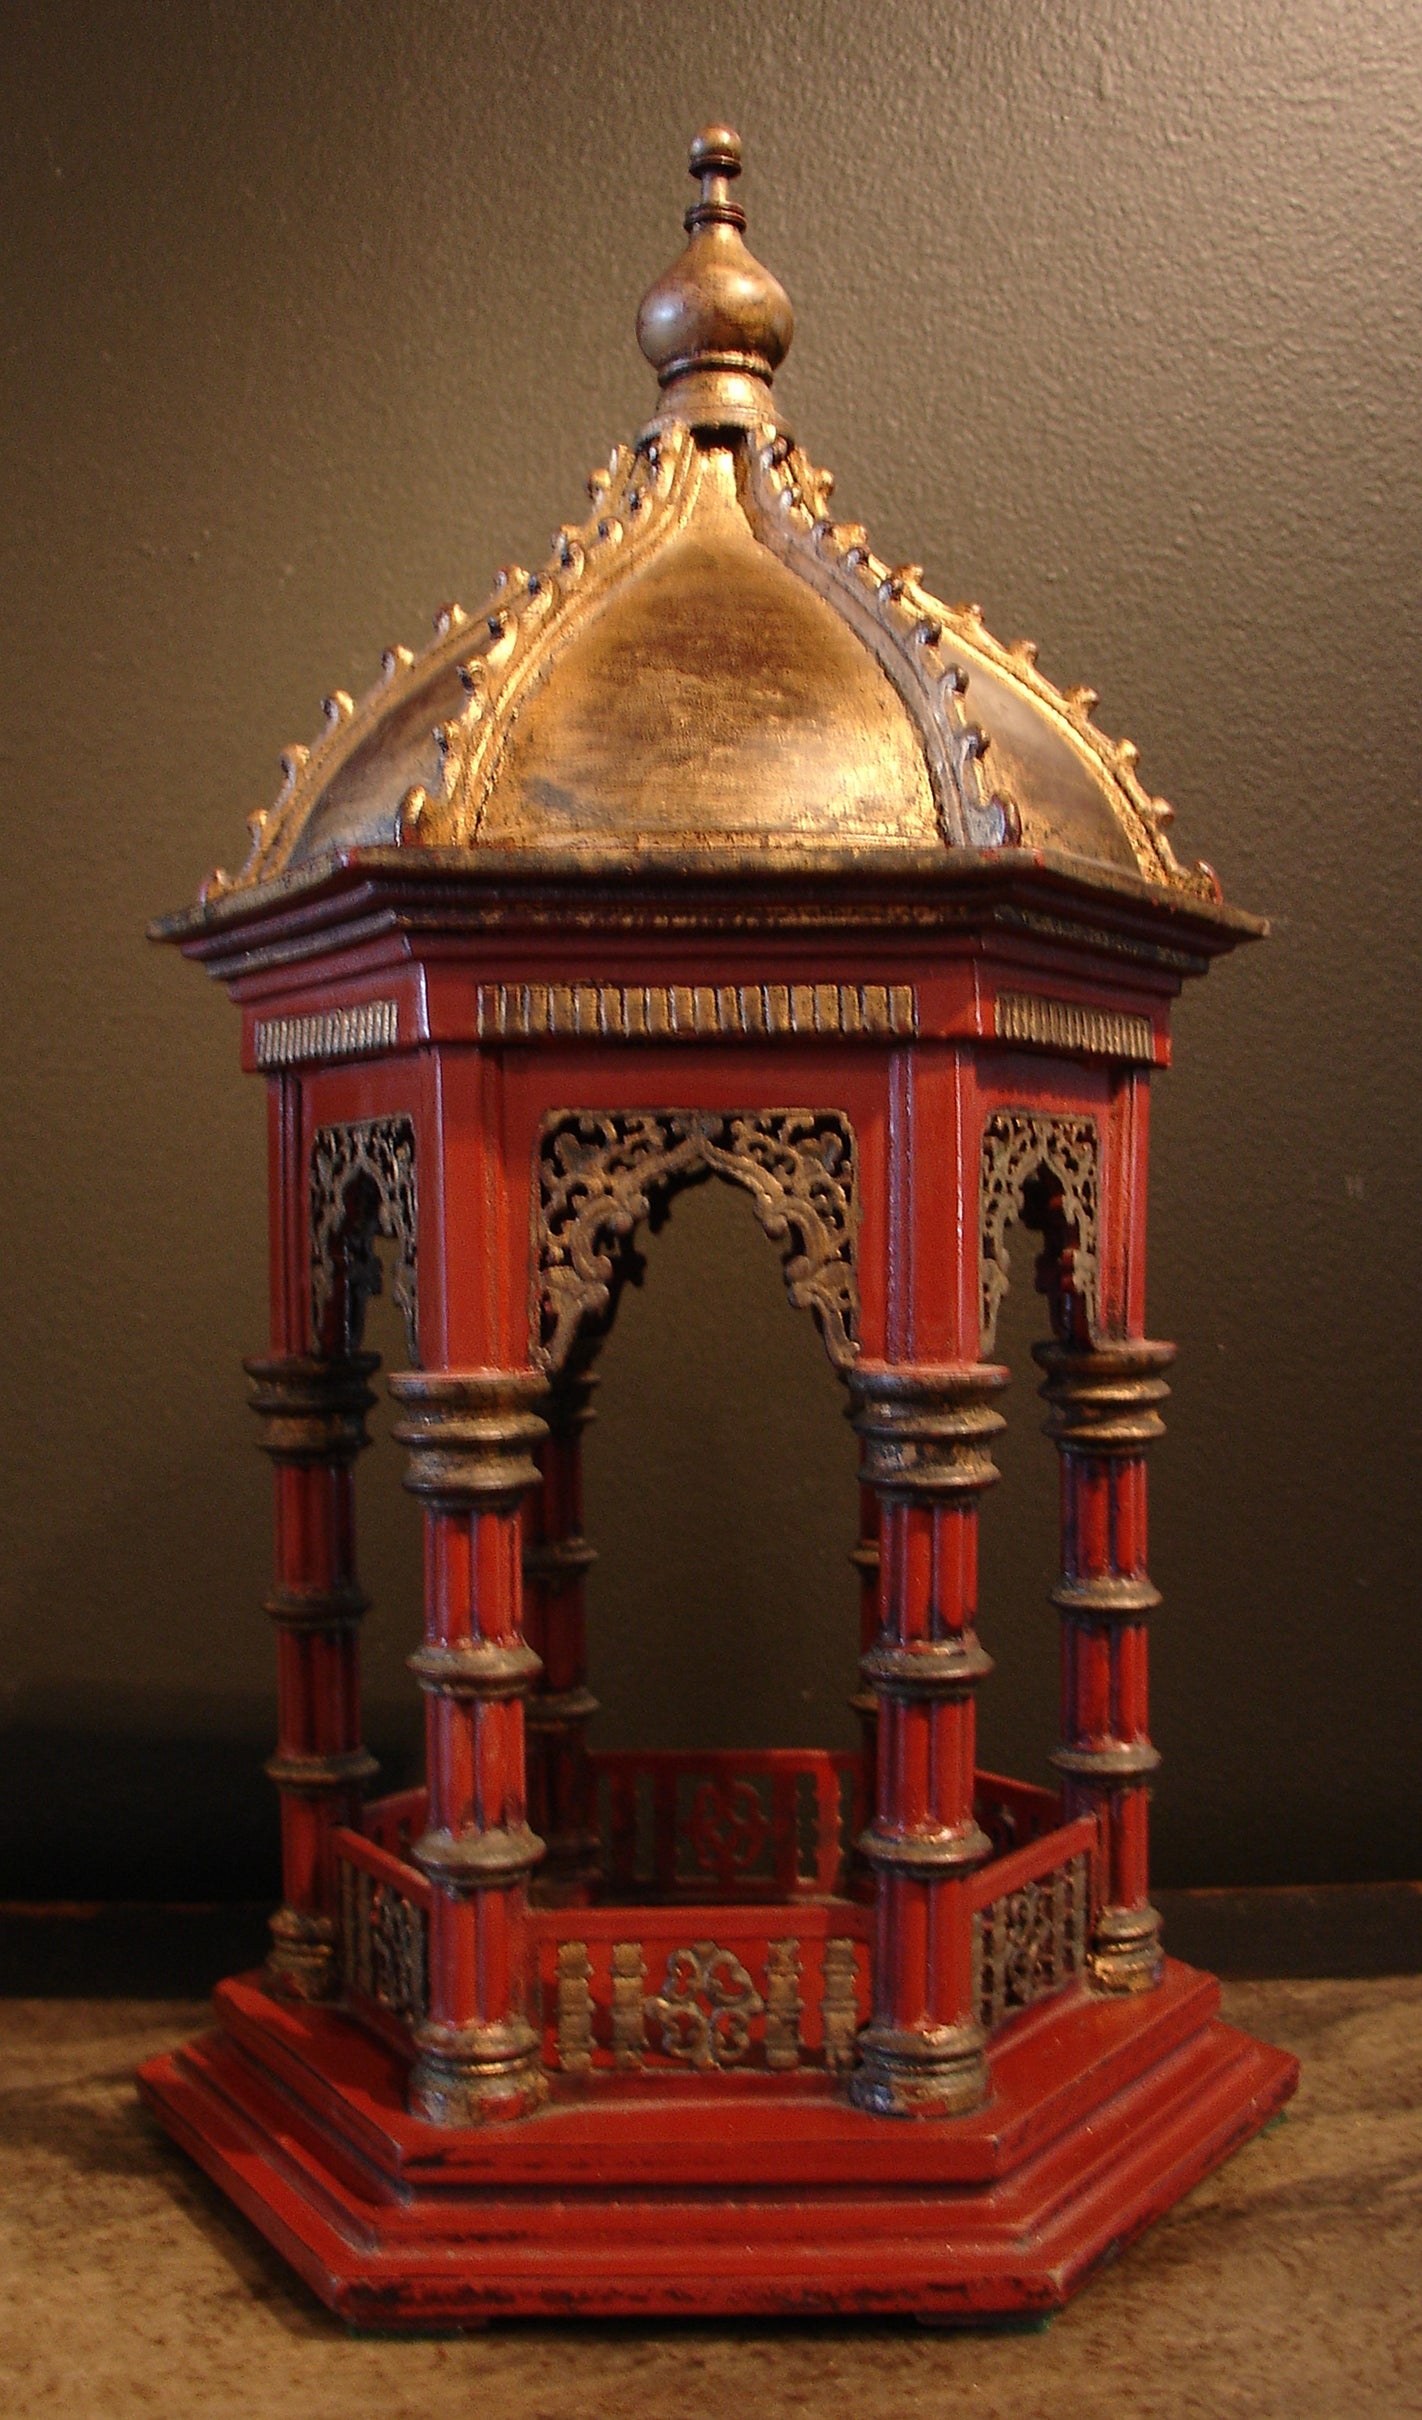 An Architectural Model of a Chinoiserie Pavilion